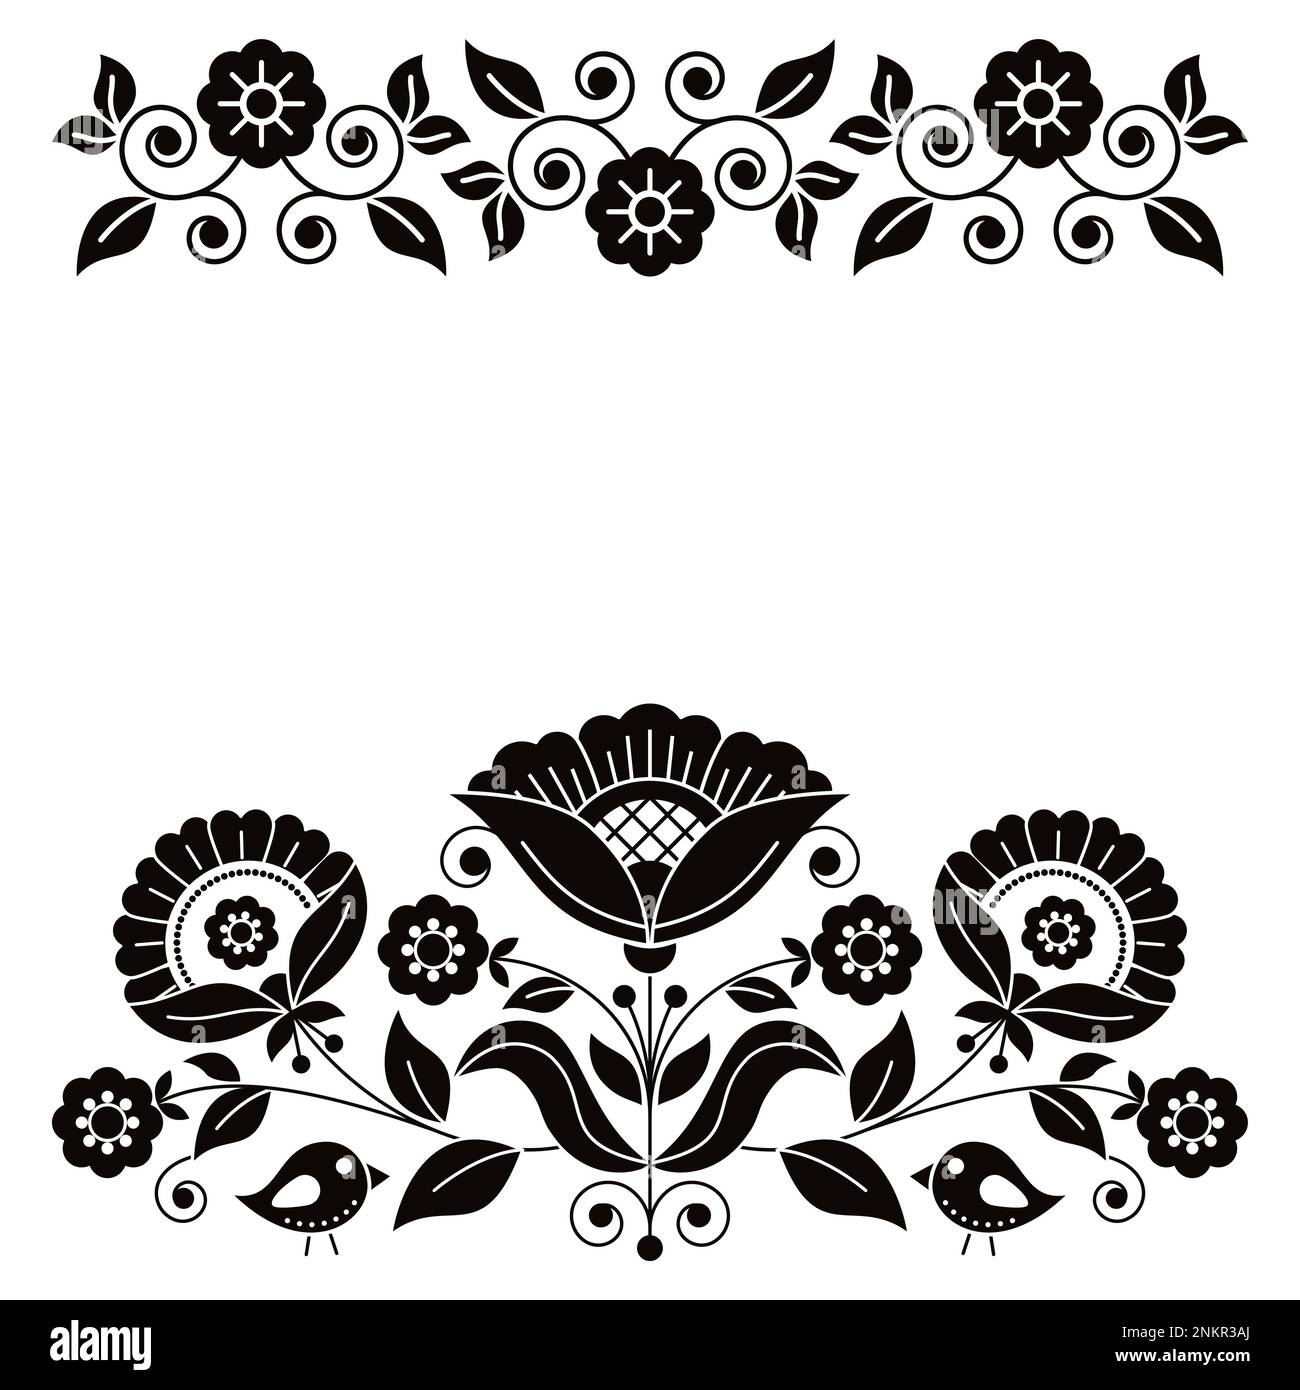 Swedish folk art vector greeting card pattern with black and white birds, heart, and flowers inspired by the traditional Scandinavian art Stock Vector